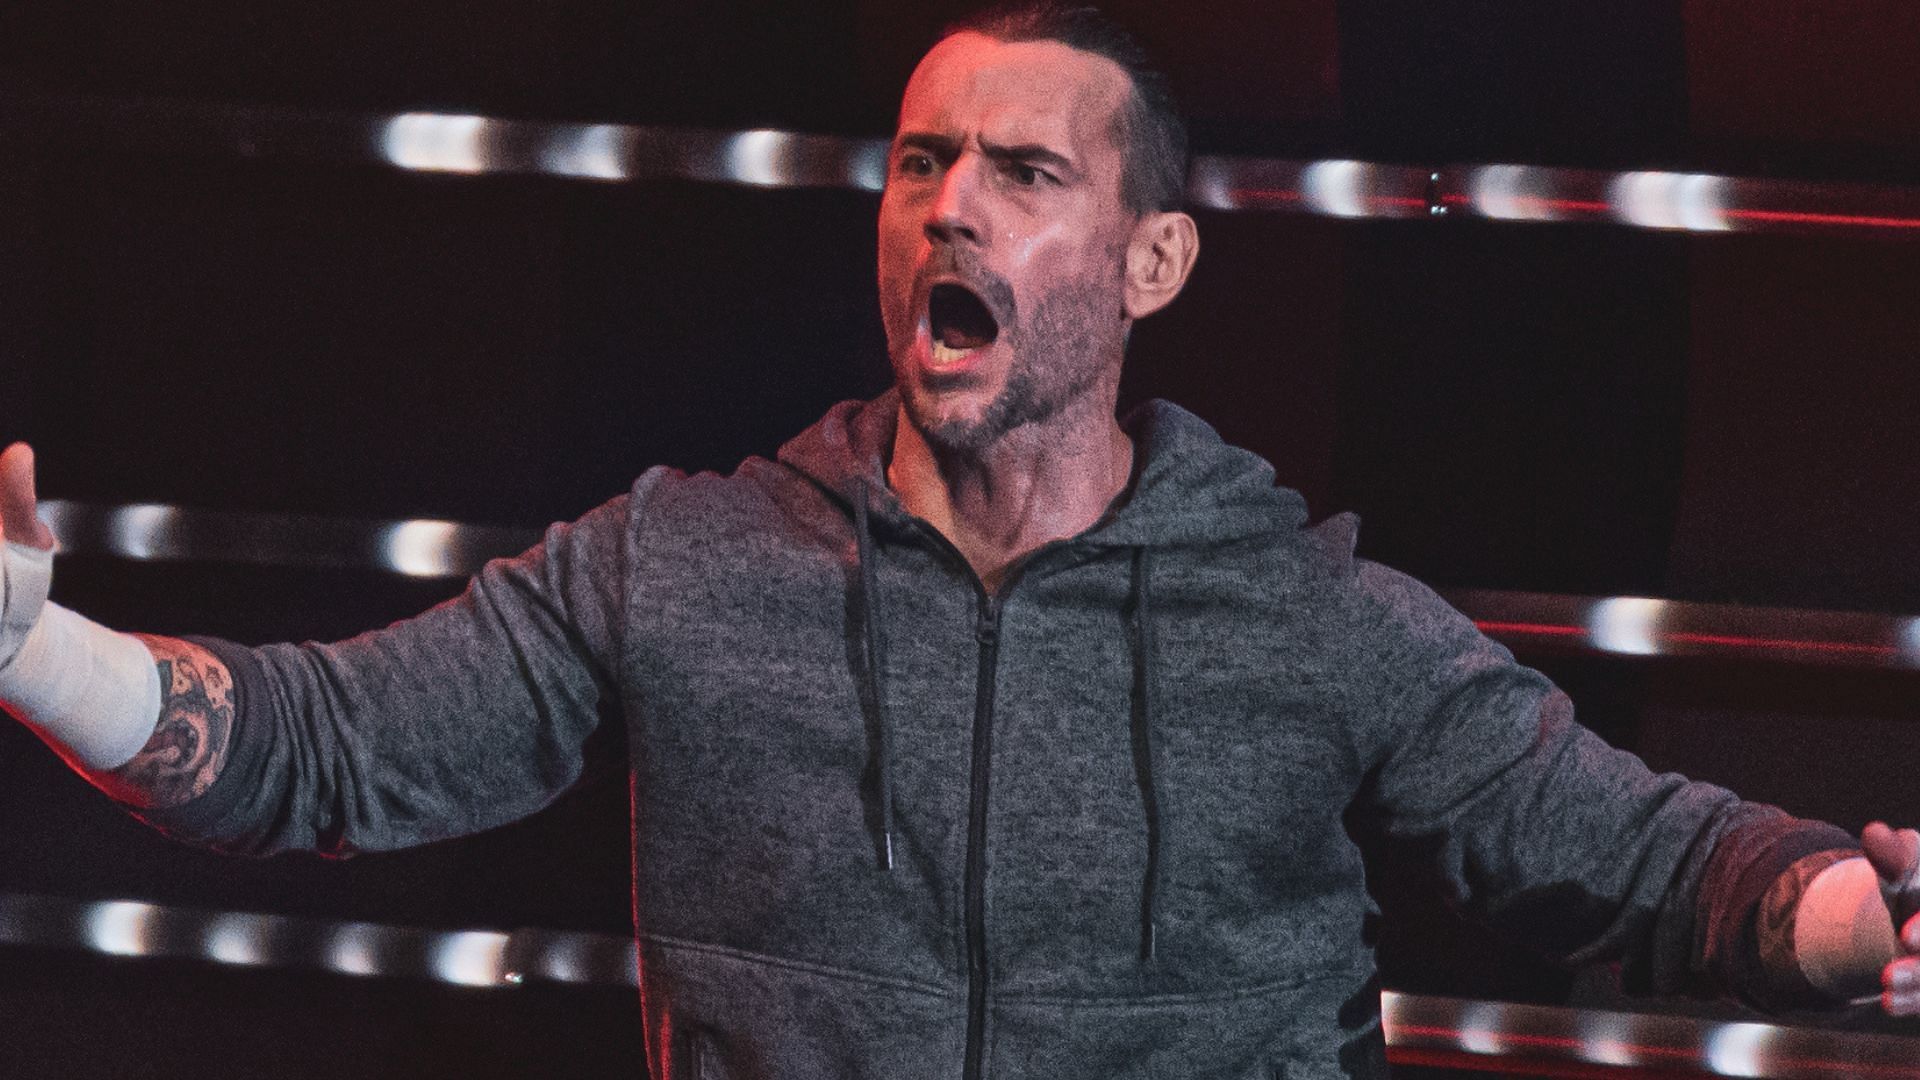 CM Punk making his entrance at an AEW event in 2022 (credit: Jay Lee Photography)